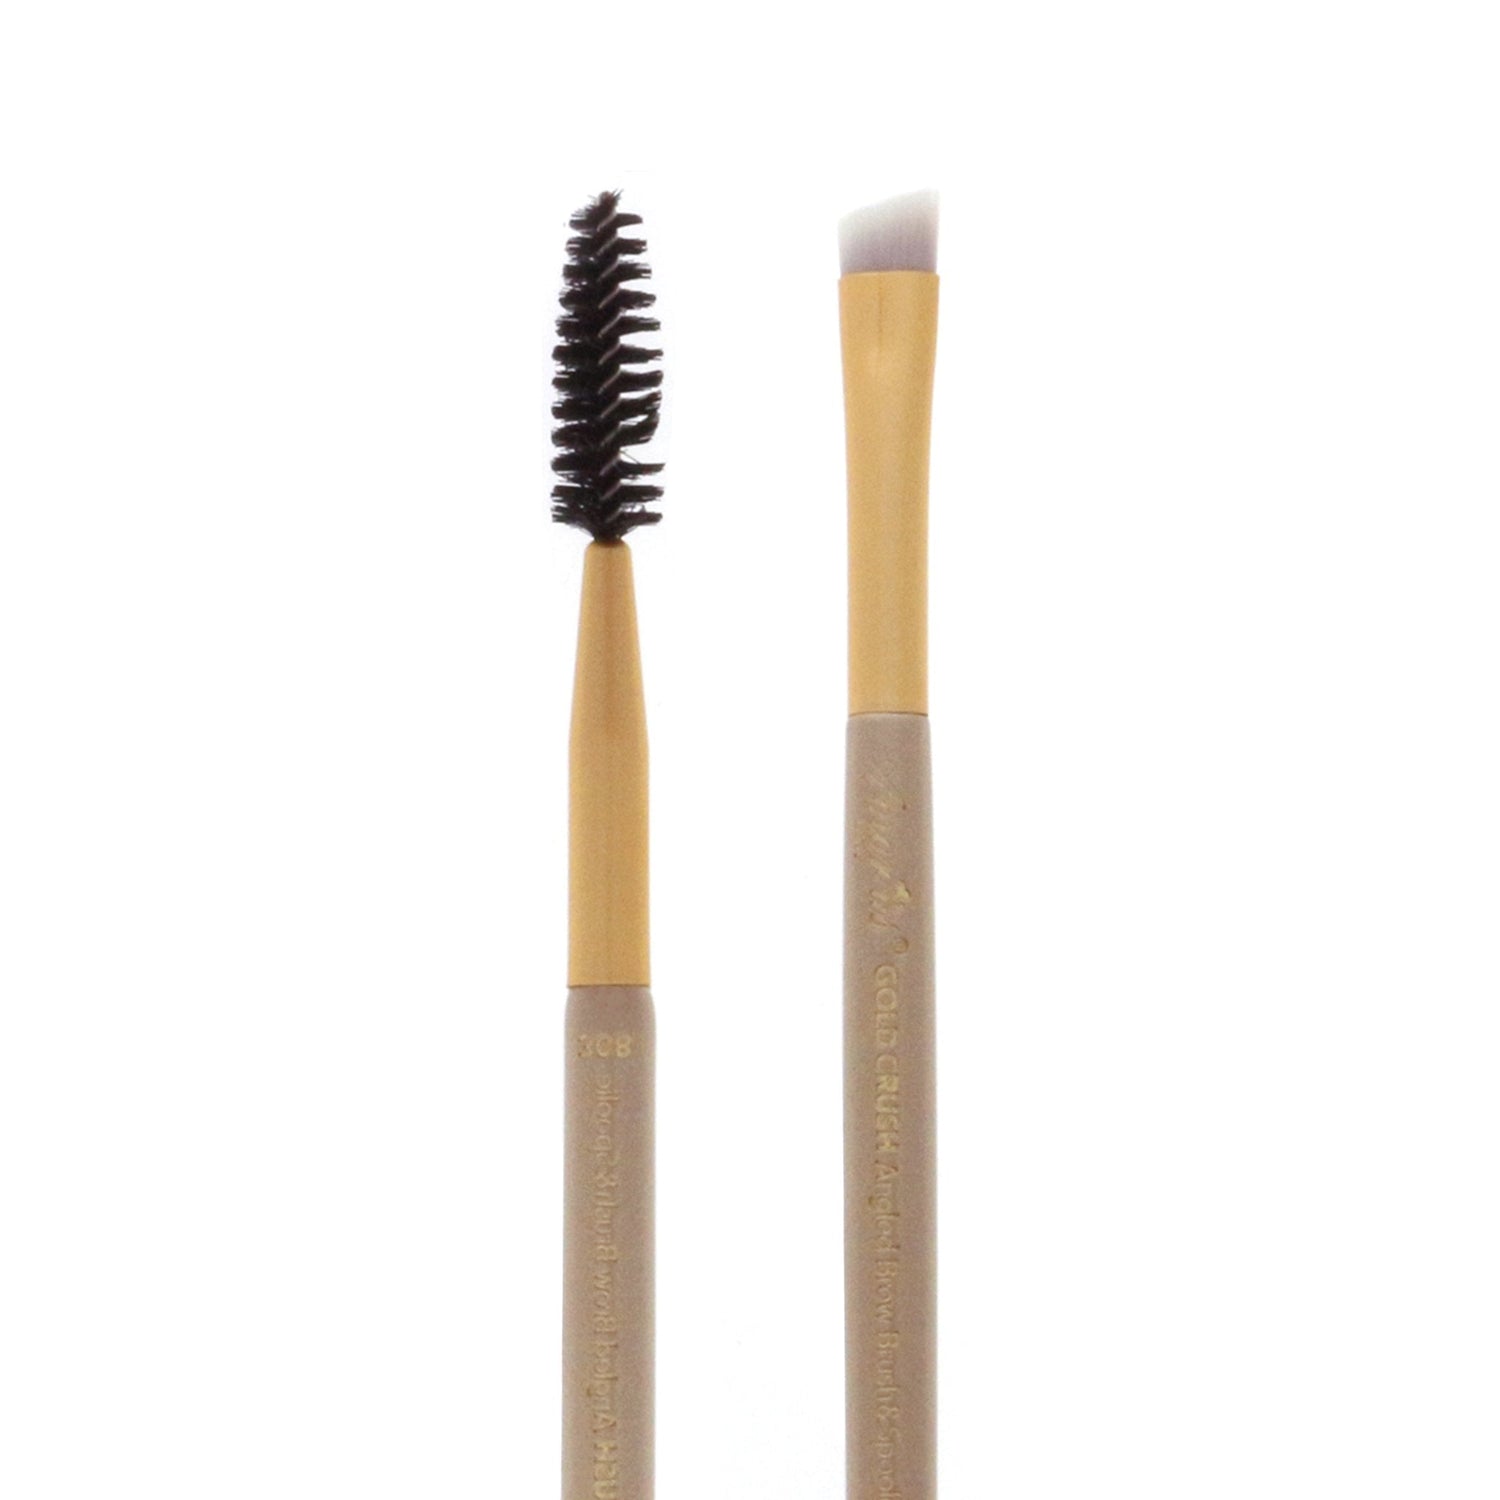 Glamour Us_Amorus_Tools &amp; Brushes_Angled Brow &amp; Spoolie 308 - Gold Crush Makeup Brush__BR-308